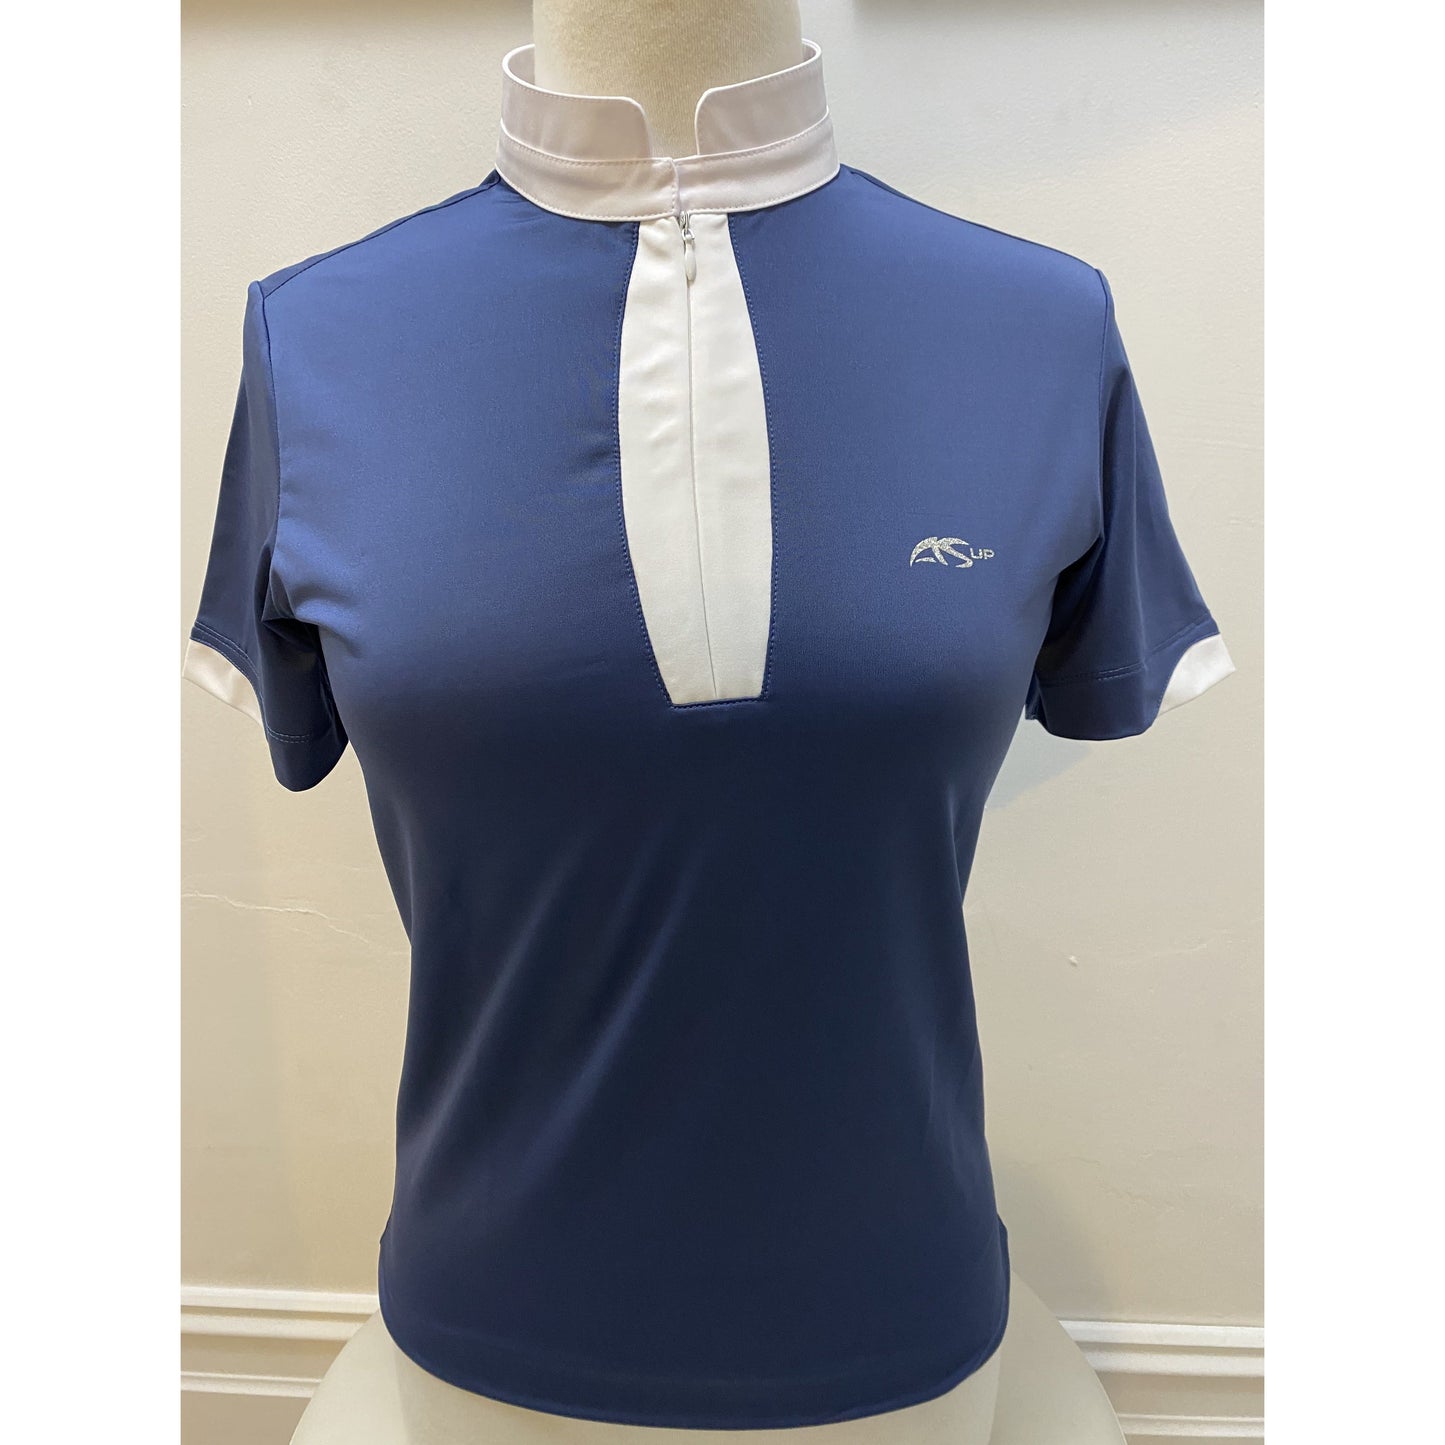 Anna Scarpati navy blue equestrian shirt with white collar on mannequin.